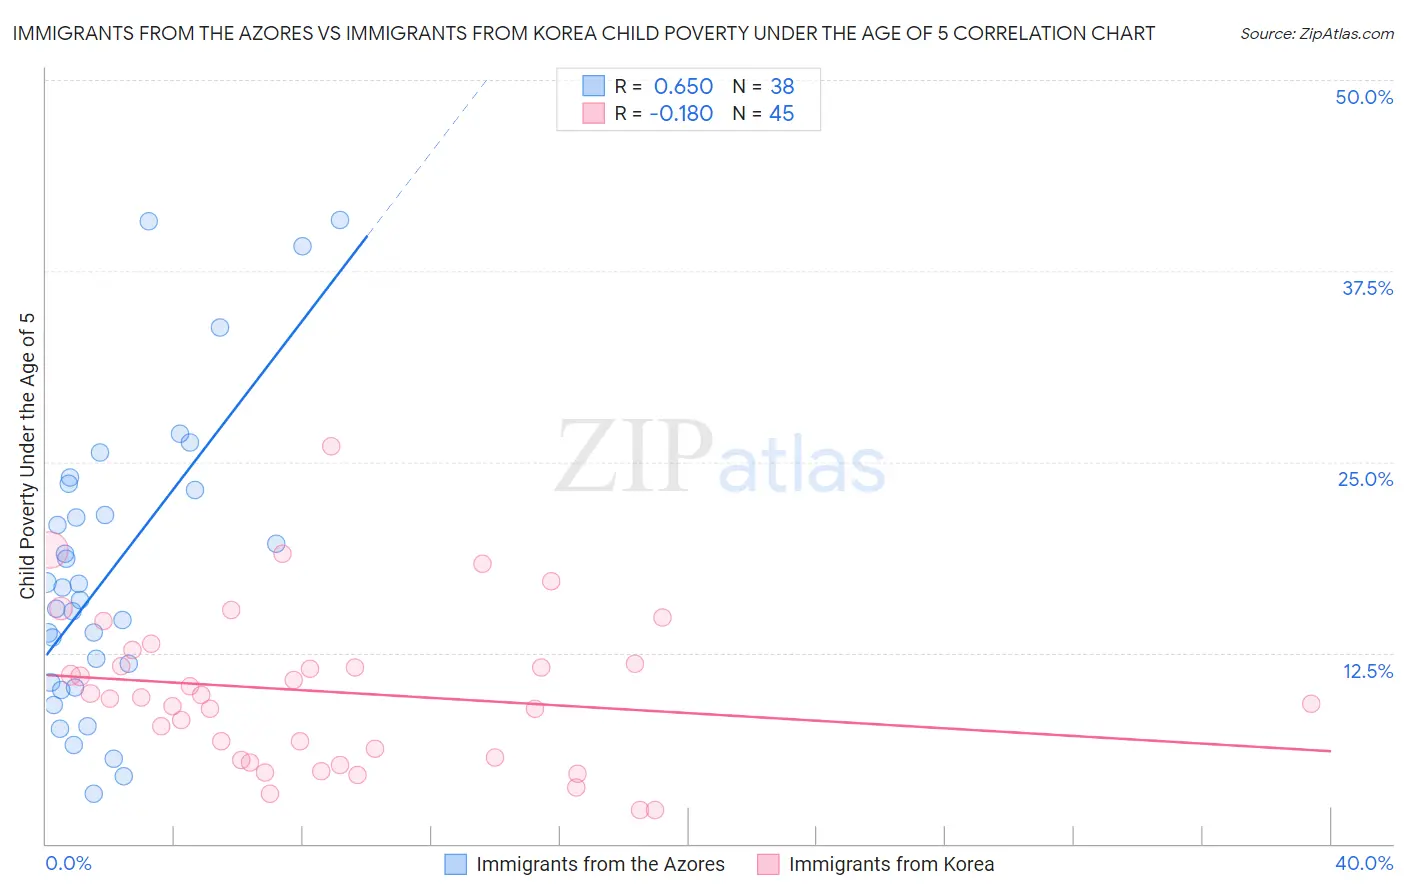 Immigrants from the Azores vs Immigrants from Korea Child Poverty Under the Age of 5